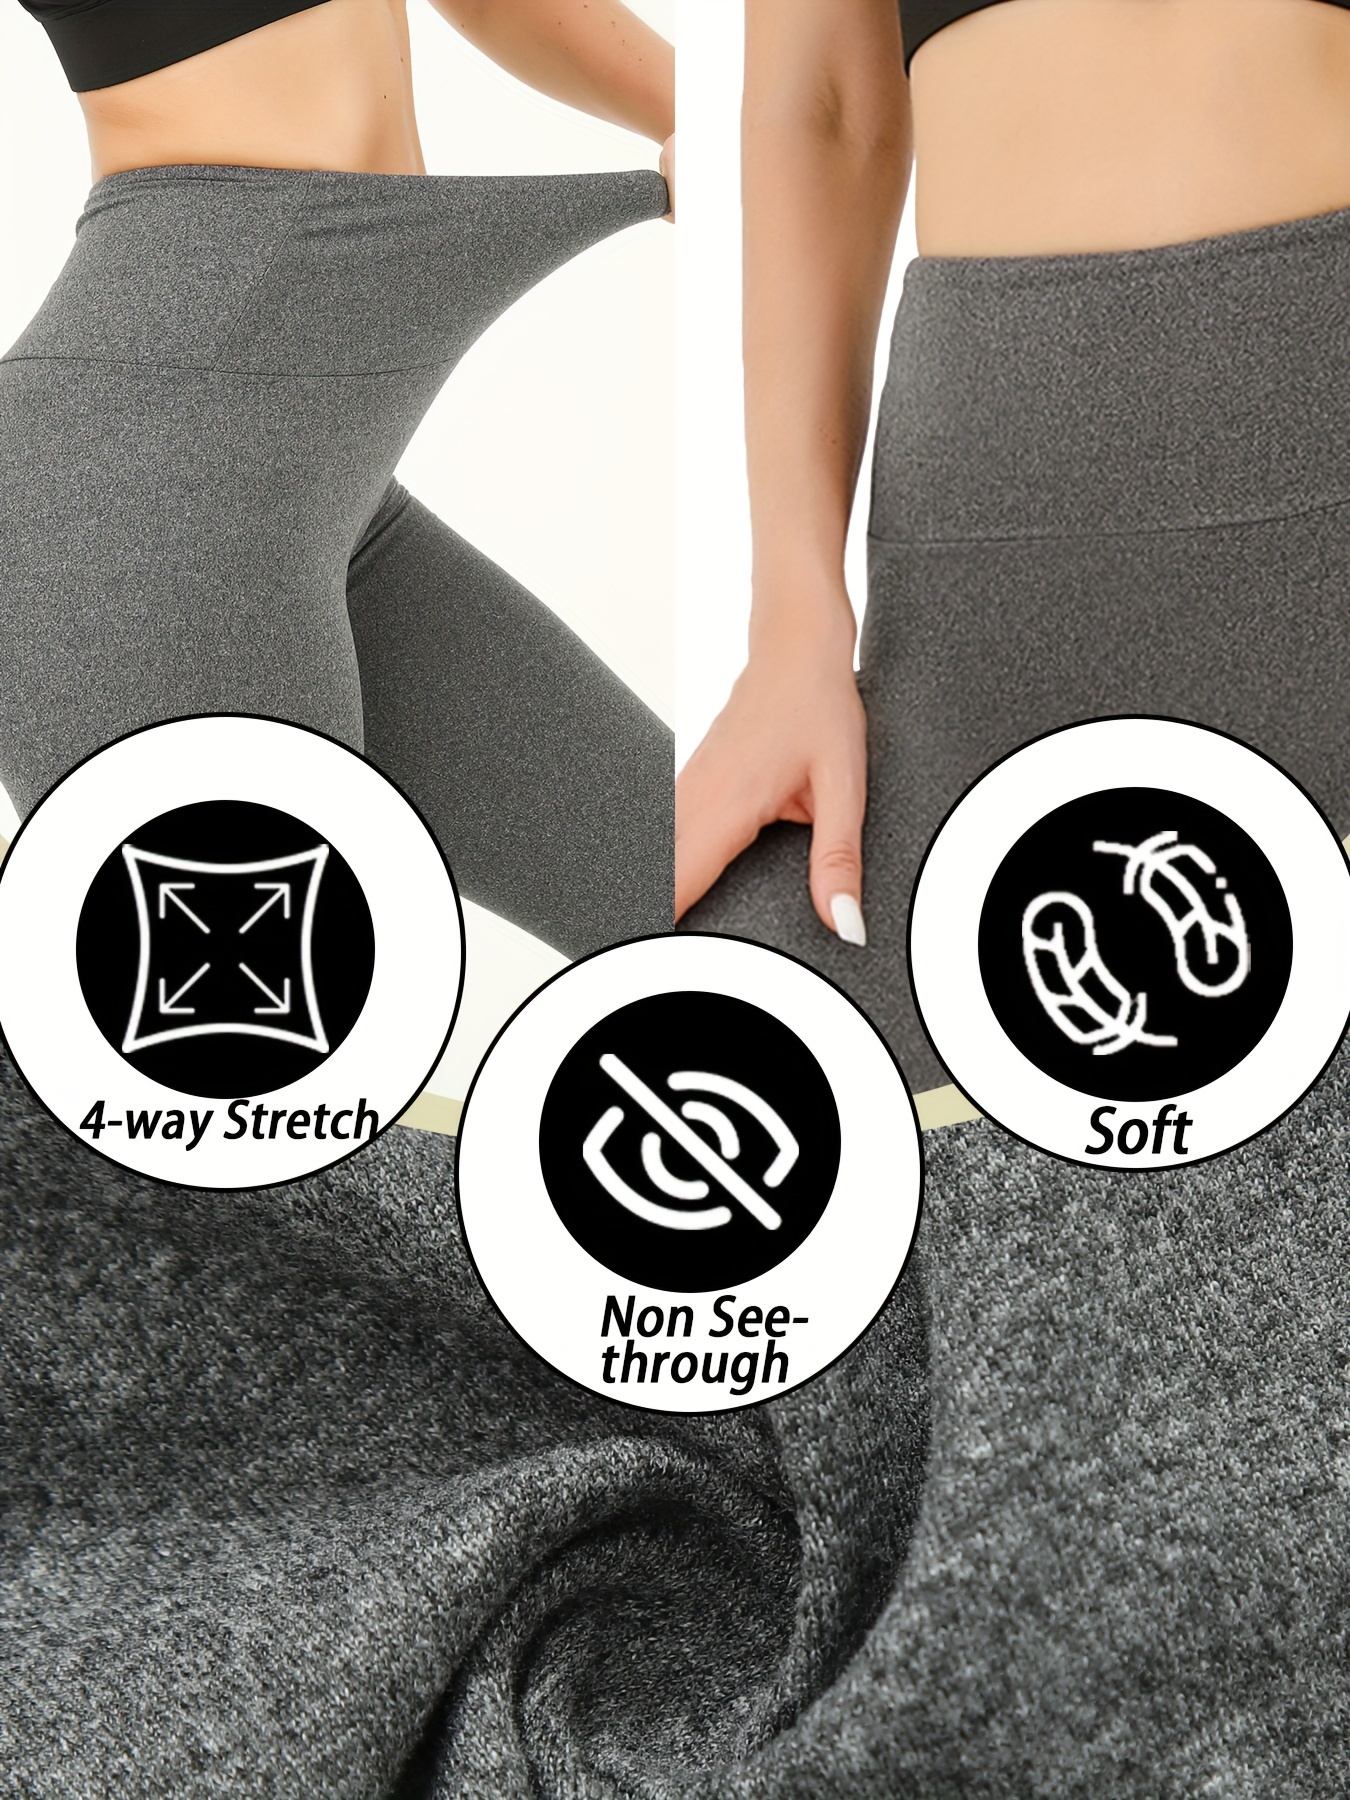 Soft Leggings For Women LLu2 High Waisted Tummy Control No See Through  Workout Yoga Pants Sports Leggings J7TY From Dhn66fdm0, $8.75